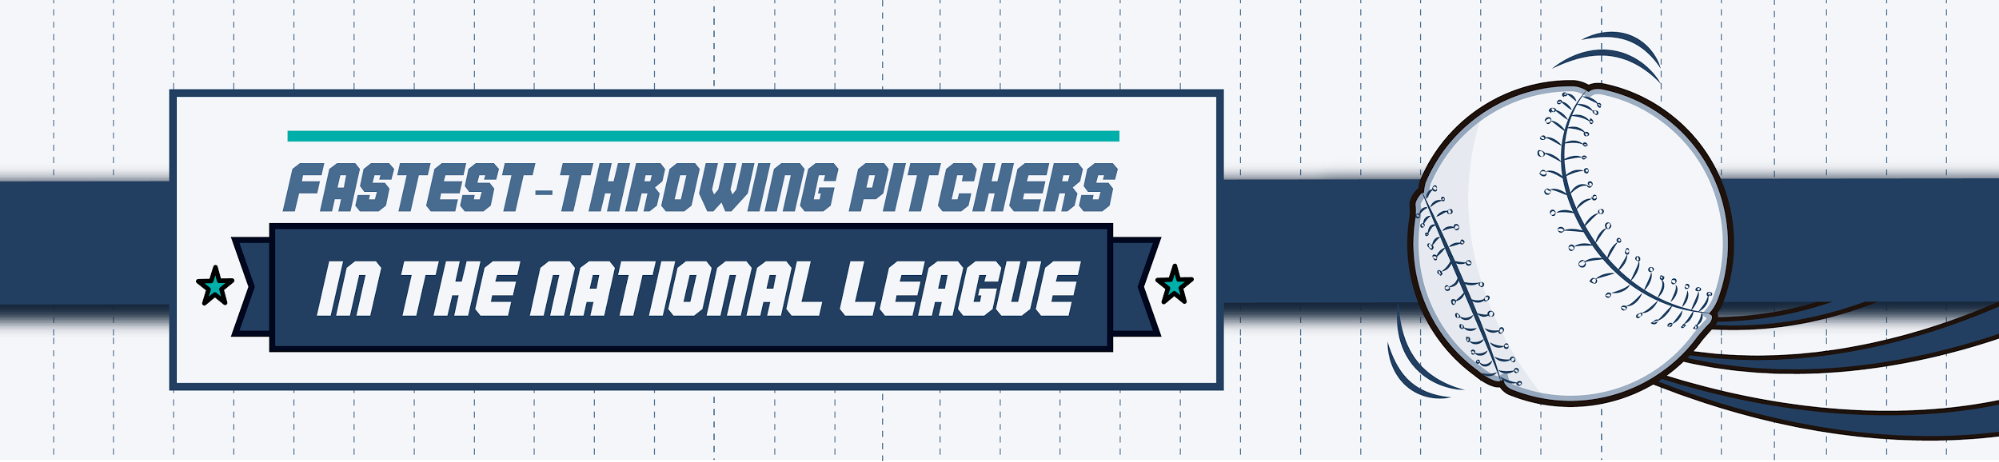 pitching-in-the-national-league